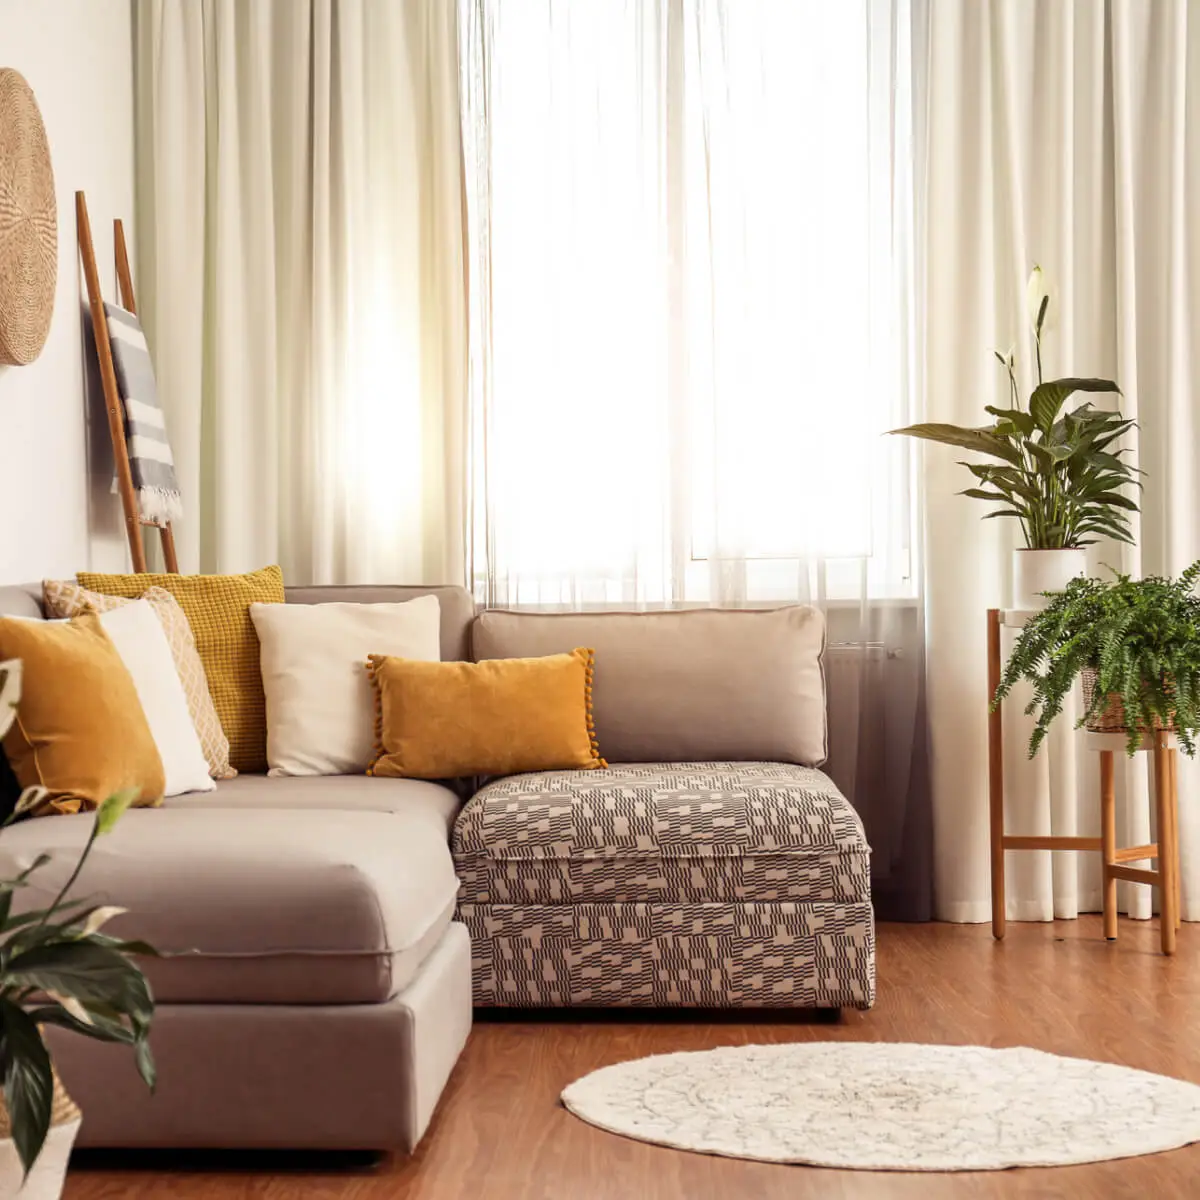 Light filled living room with sofa, plants and a rug, in the background hangs floor to ceiling curtains to keep out some of the glare from the sun.